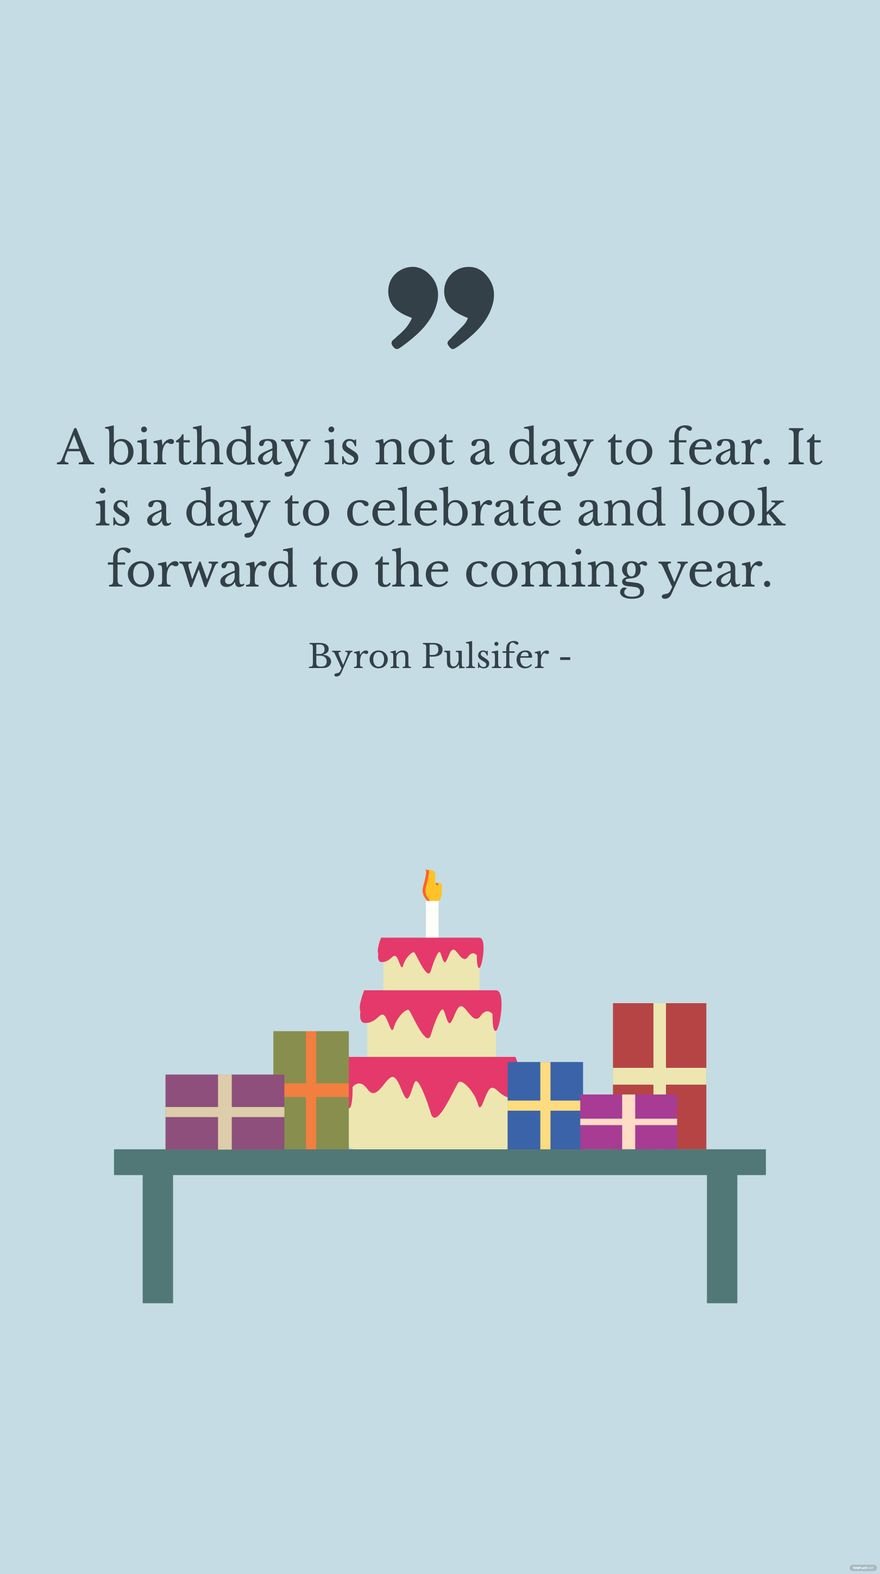 Byron Pulsifer - A birthday is not a day to fear. It is a day to celebrate and look forward to the coming year.